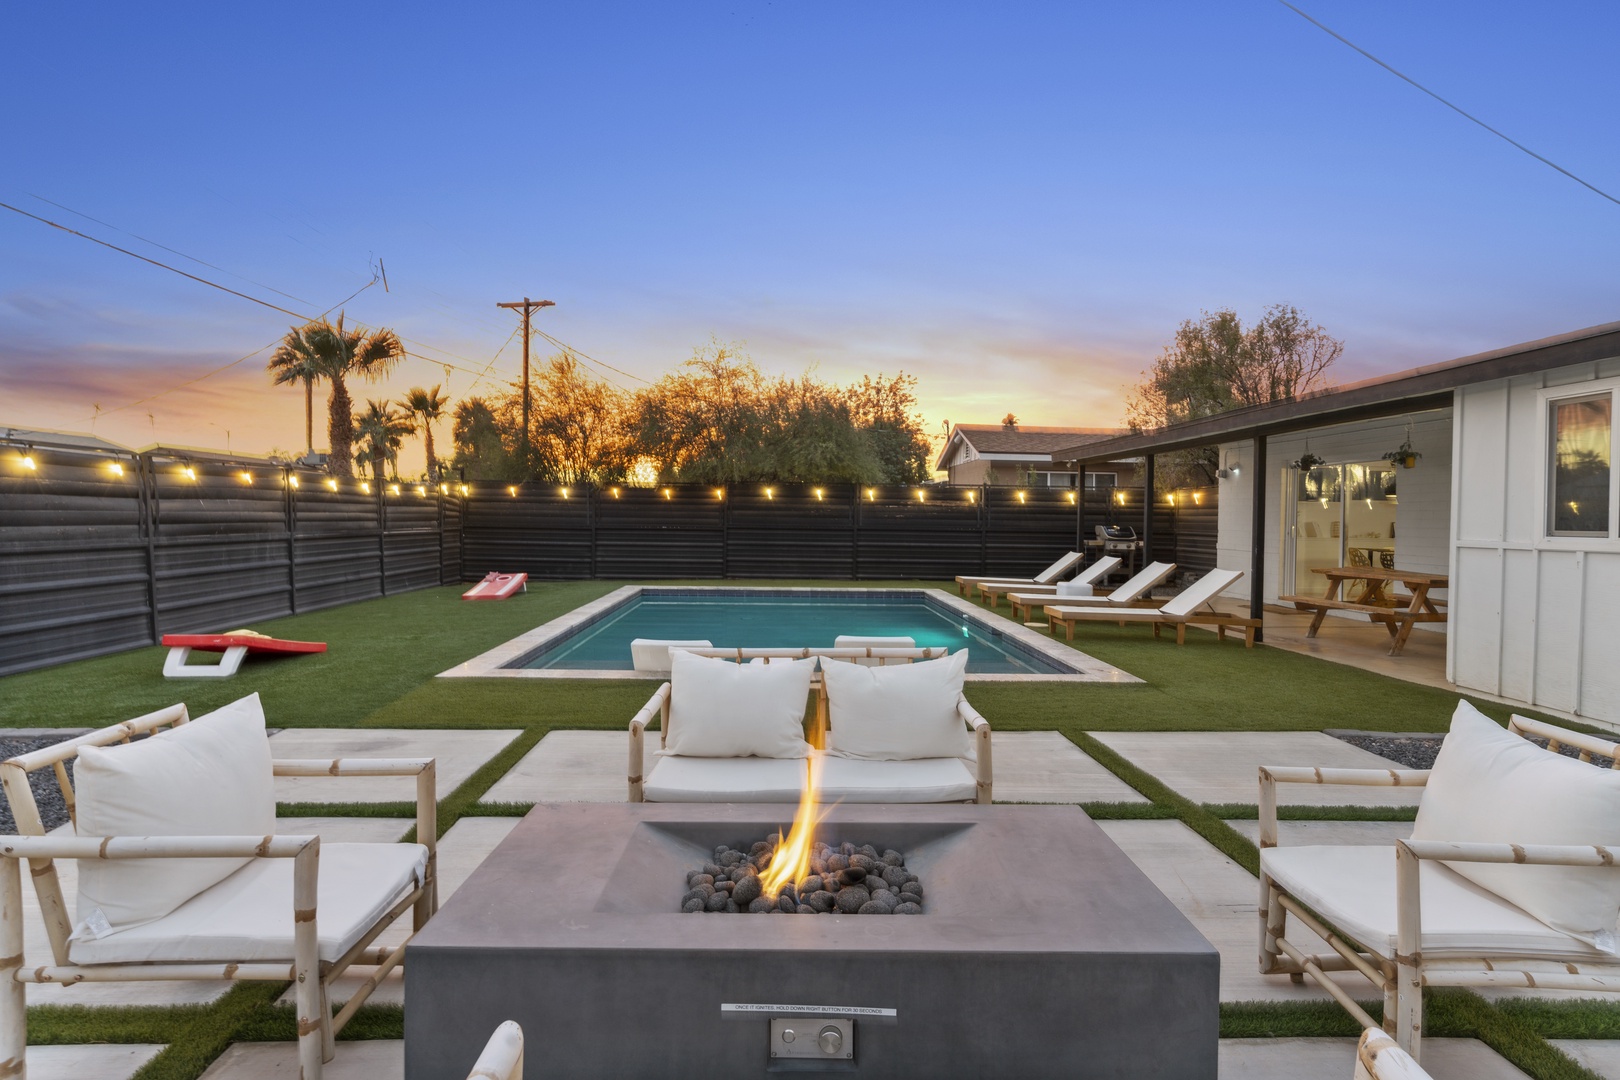 Tulum Themed Scottsdale Gem with Pool, Firepit!